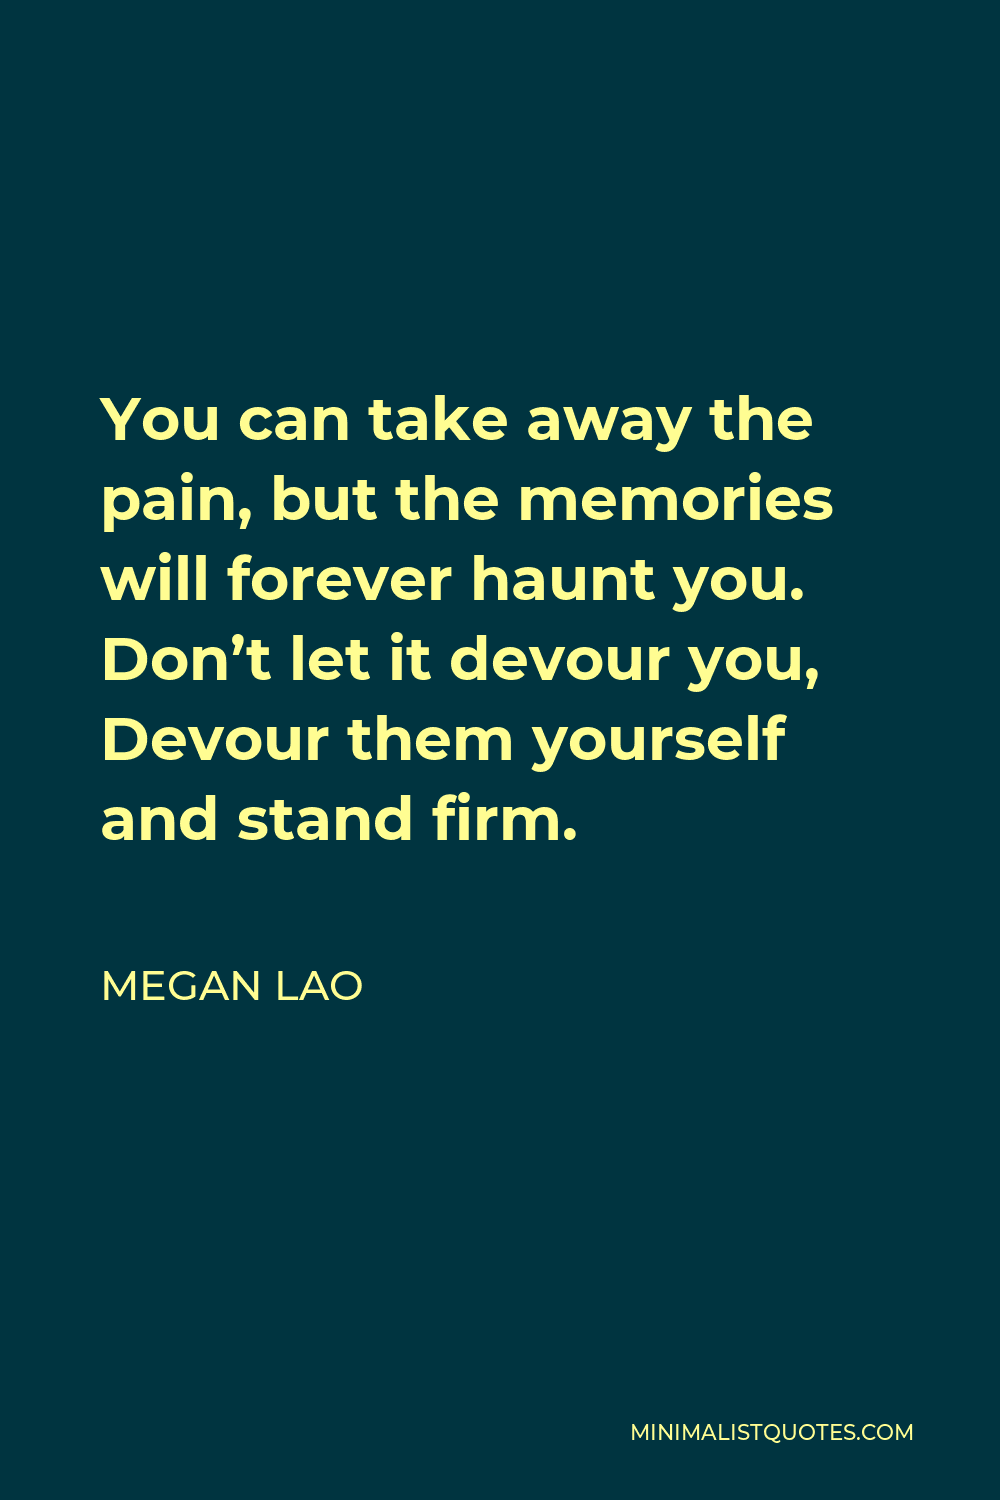 Megan Lao Quote - You can take away the pain, but the memories will forever haunt you. Don’t let it devour you, Devour them yourself and stand firm.